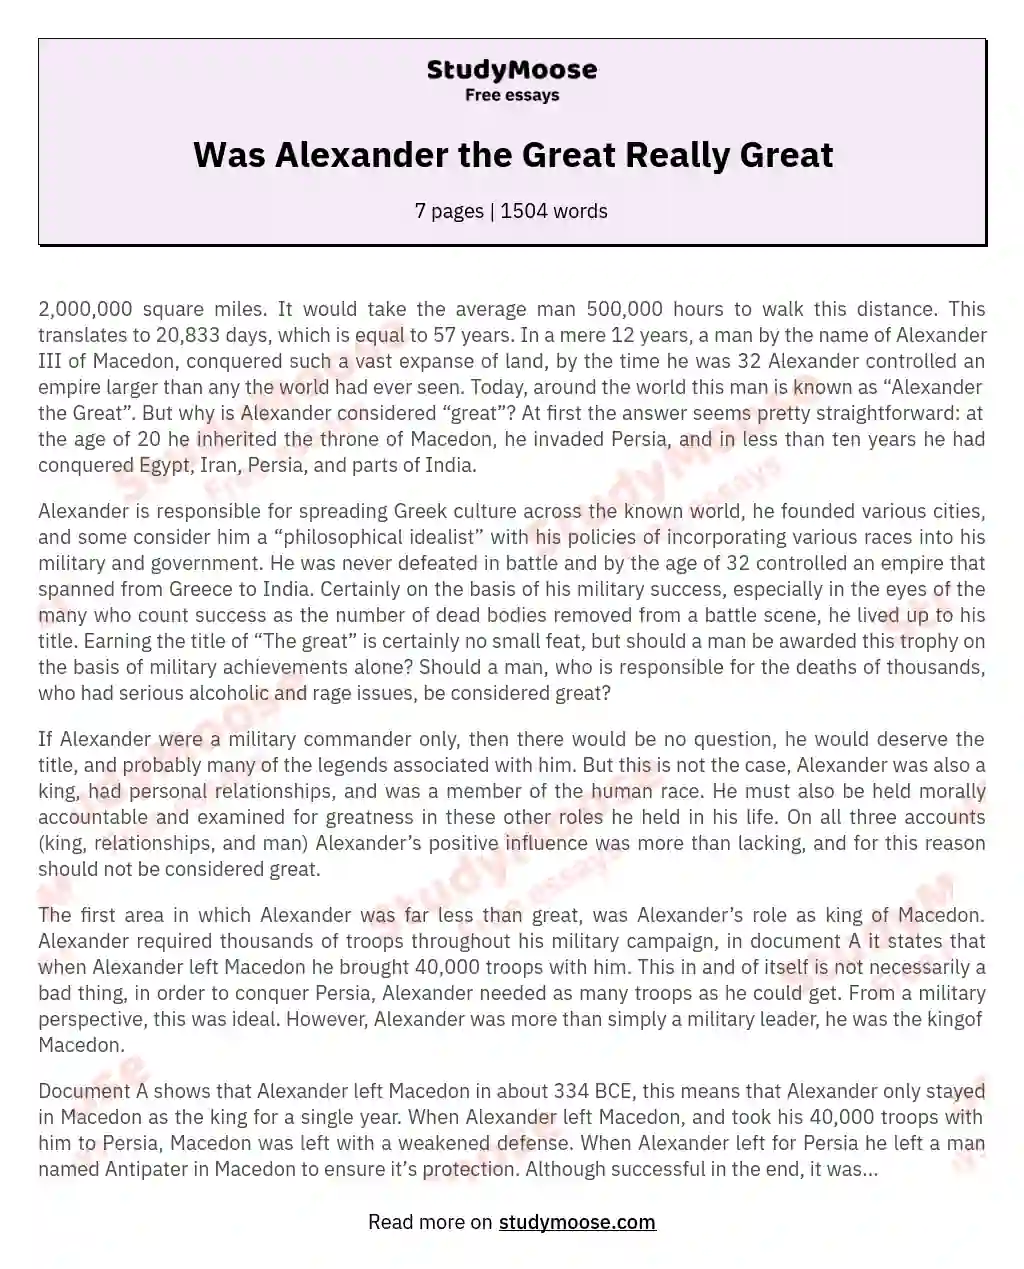 Was Alexander the Great Really Great essay